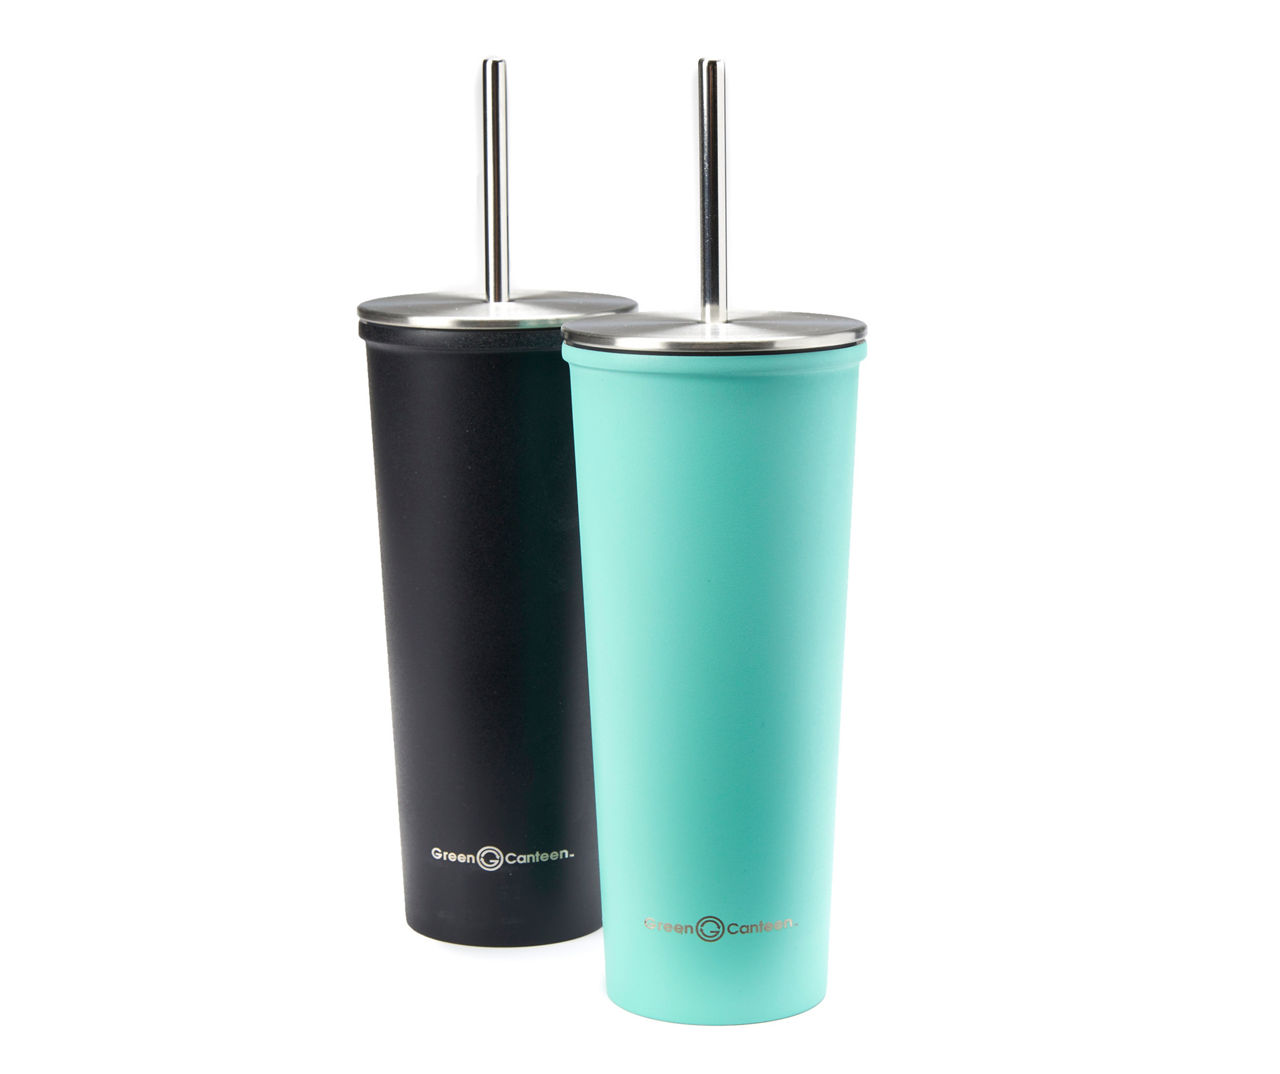 Green Canteen 40 oz. Double Wall Stainless Steel Teal/Purple Tumbler with Handle (2-Pack)